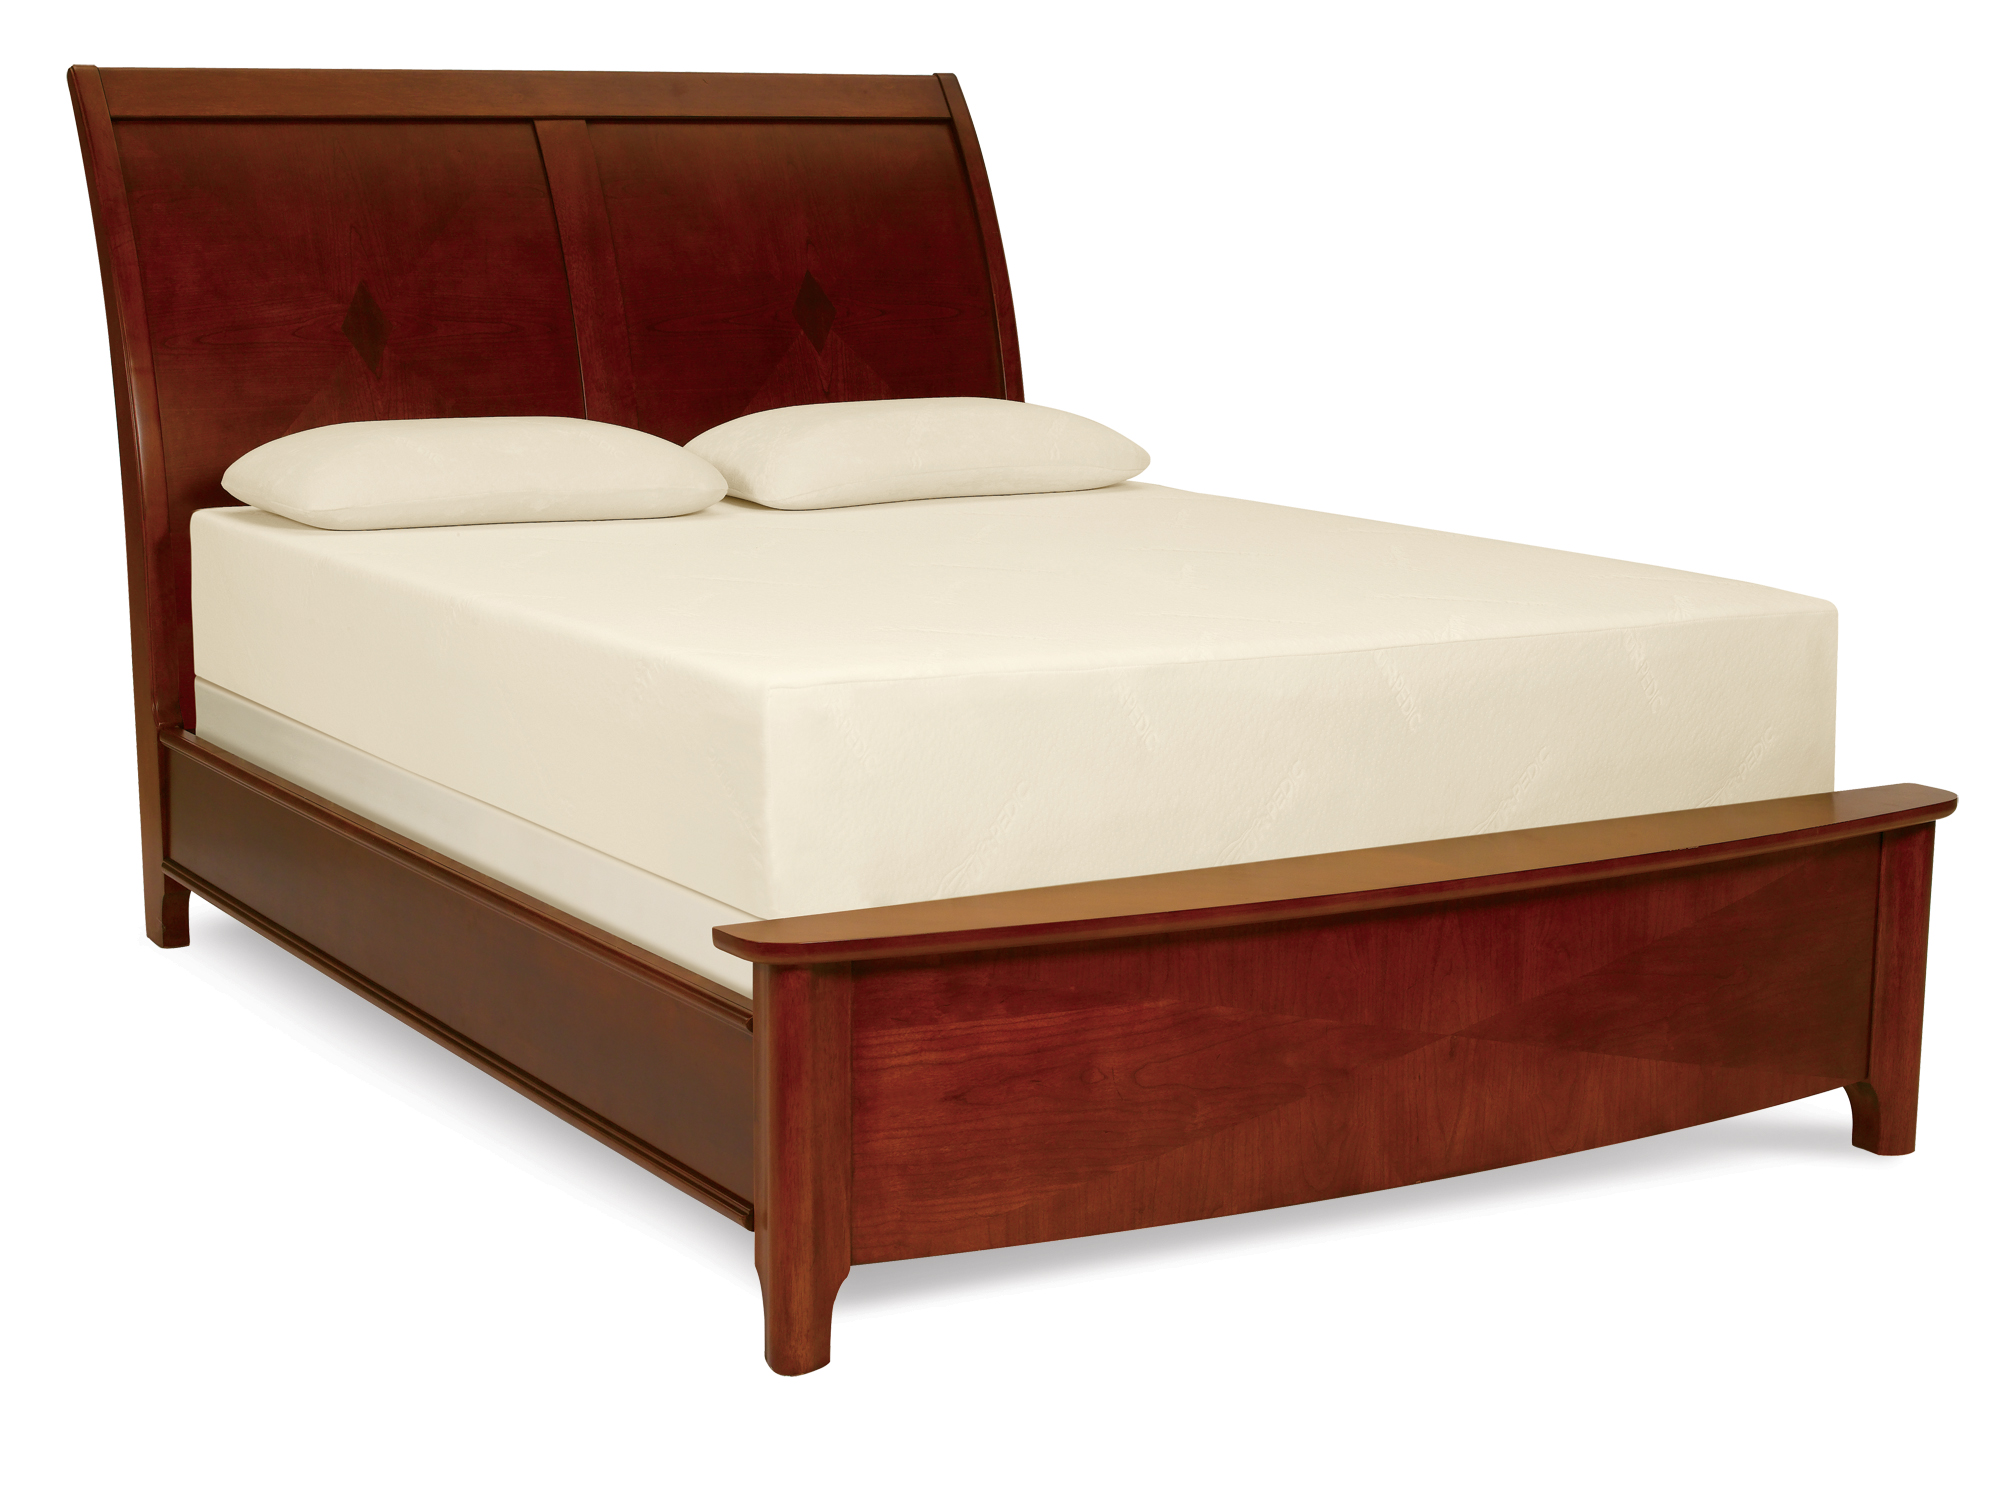 The Deluxebed By Tempur Pedic 641 